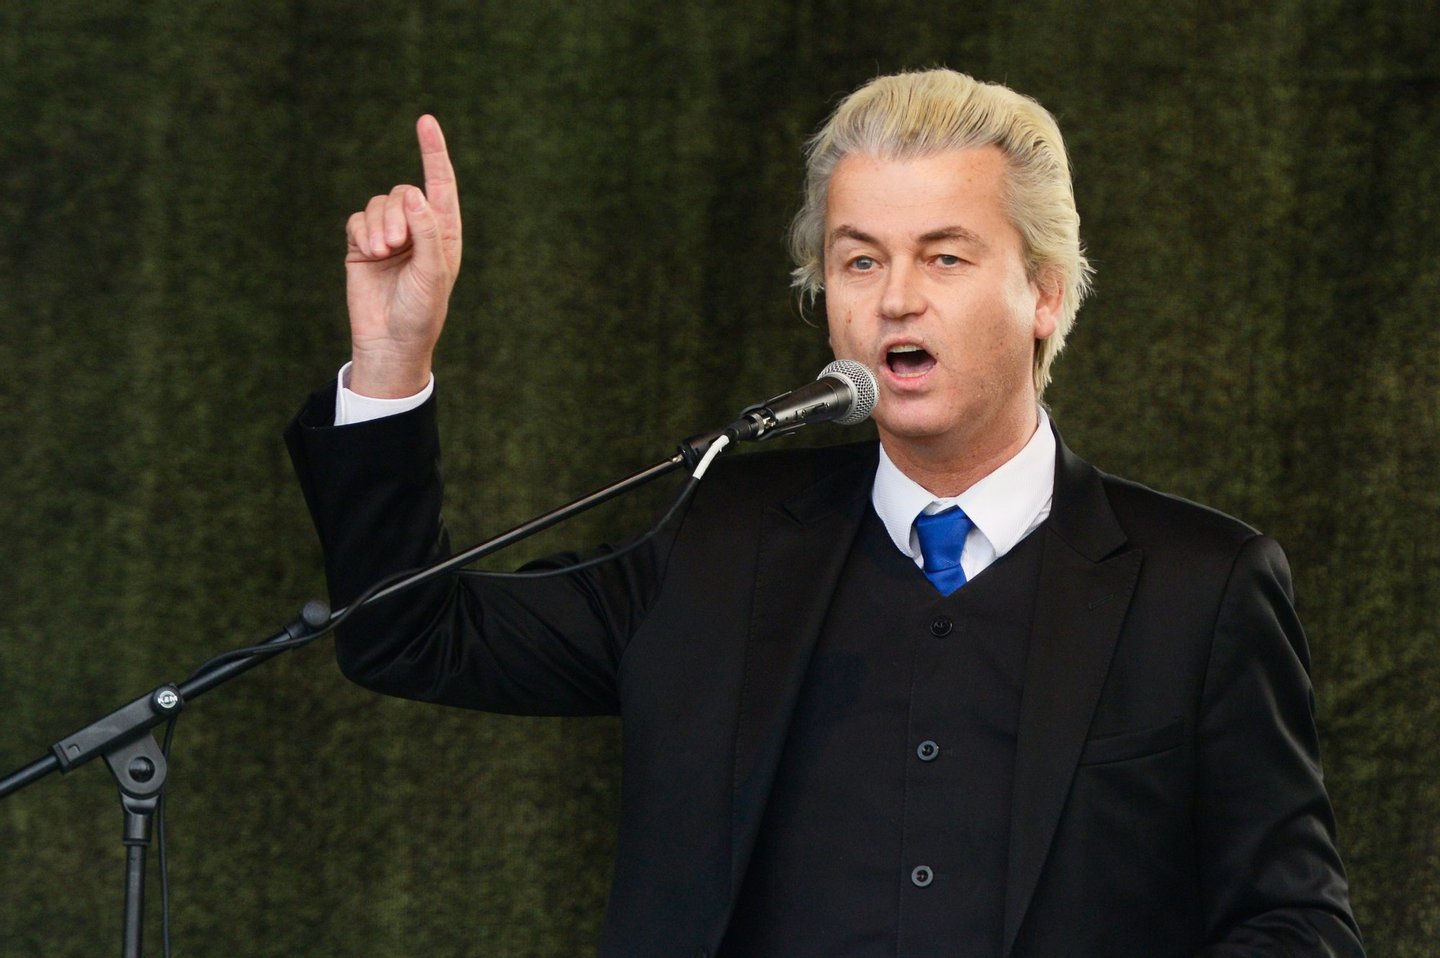 Dutch right-wing Party for Freedom (PVV) leader Geert Wilders (R) addresses a rally of German right-wing movement PEGIDA (Patriotic Europeans Against the Islamisation of the Occident) on April 13, 2015 in Dresden, south-eastern Germany. The PEGIDA marches -- which have voiced anger against Islam and "criminal asylum seekers" and vented a host of other grievances -- began in Dresden in October 2014 with several hundred supporters and have since steadily grown. (Photo credit should read ROBERT MICHAEL/AFP/Getty Images)